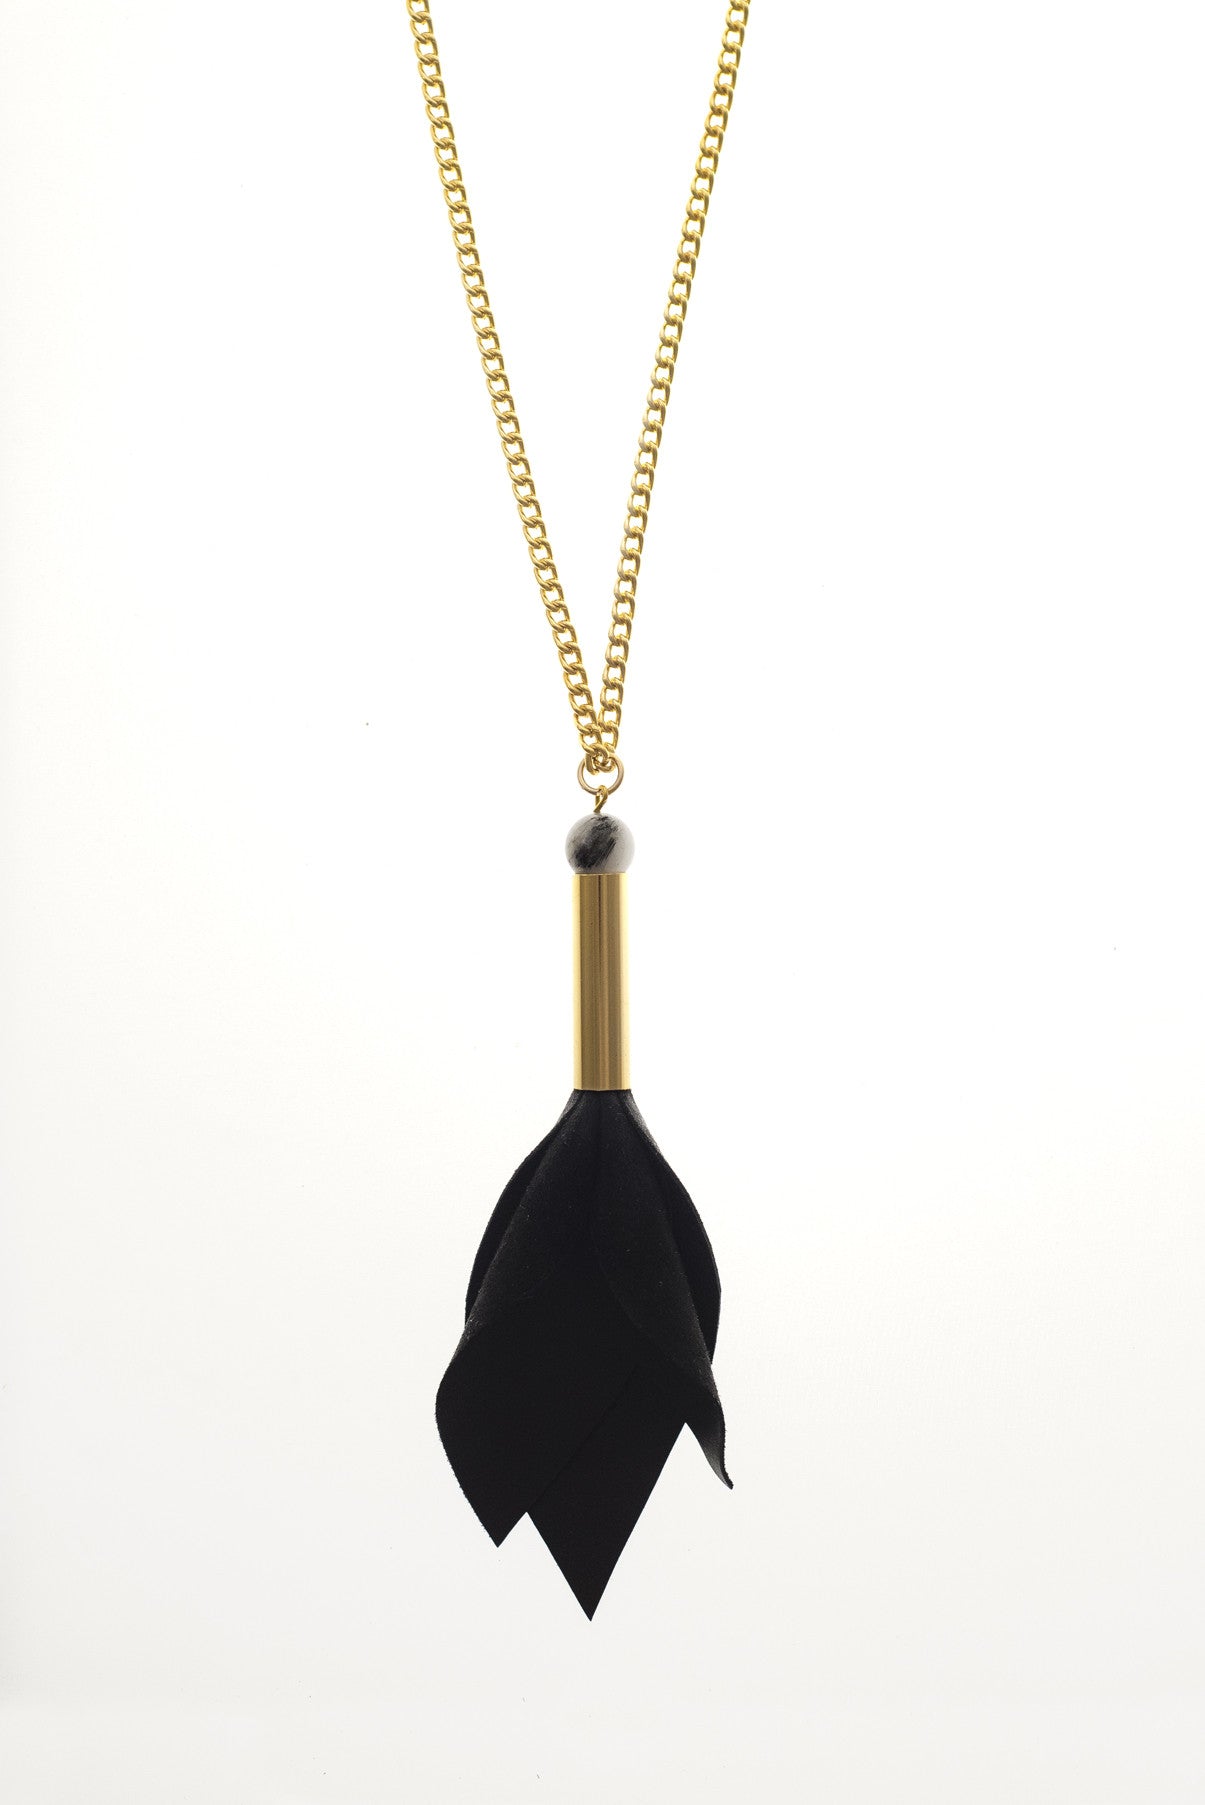 This long tulip necklace is made of hand-cut black leather, hand-cut and galvanized brass, rutilated quartz and galvanized metal components.